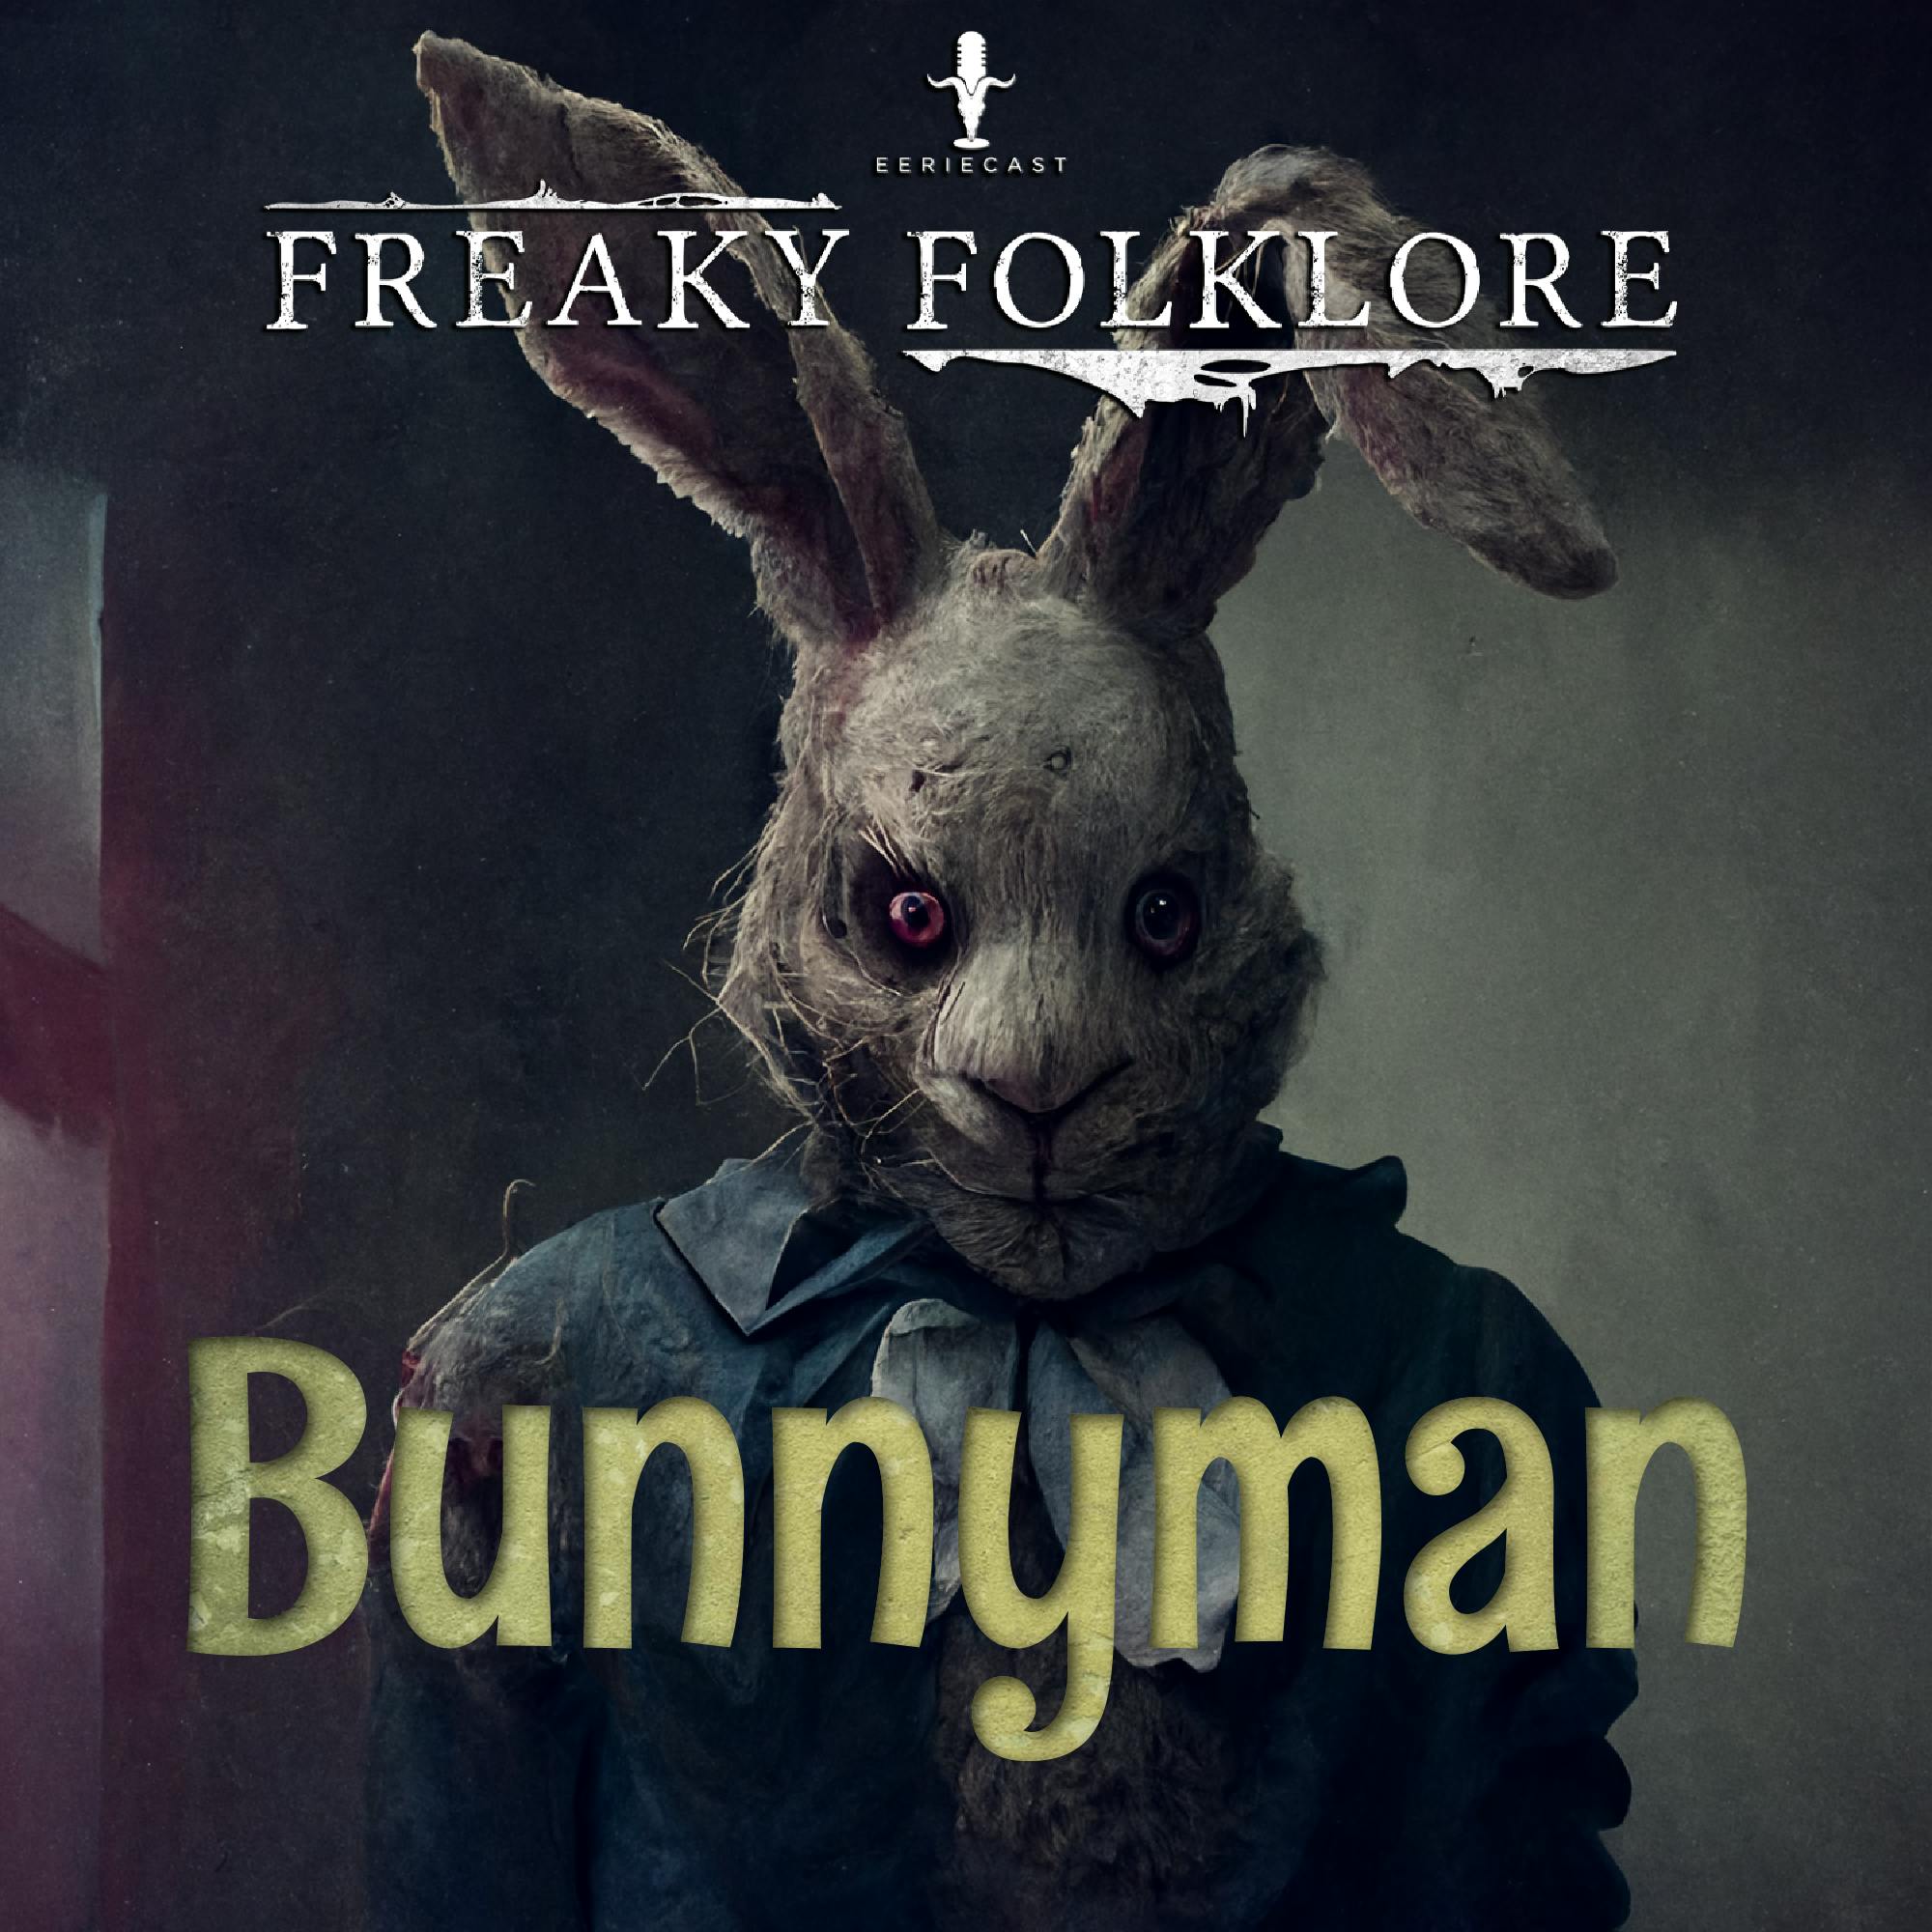 Bunny Man - A Terrifying Legend With a Fuzzy Tail